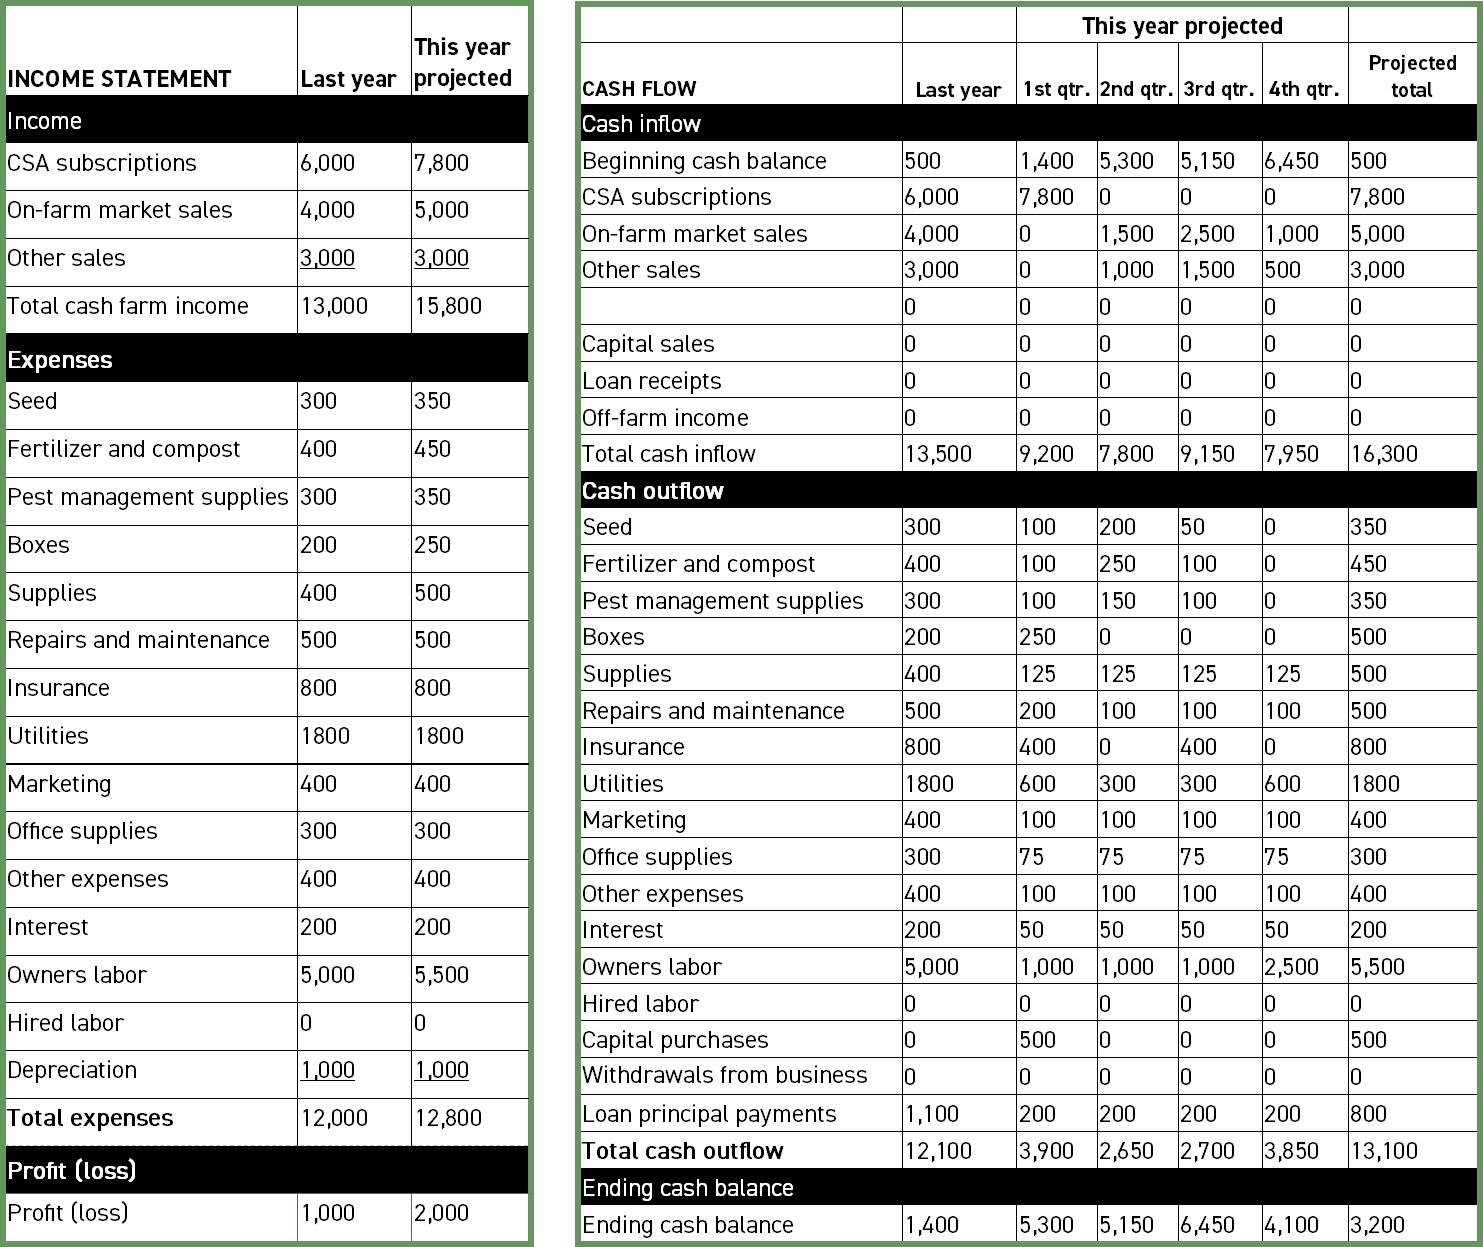 Figure 4: Income statement and cash flow for example farm. Note the differences and similarities between these two financial statements. Compare what is included here with the formulas in Figure 3.